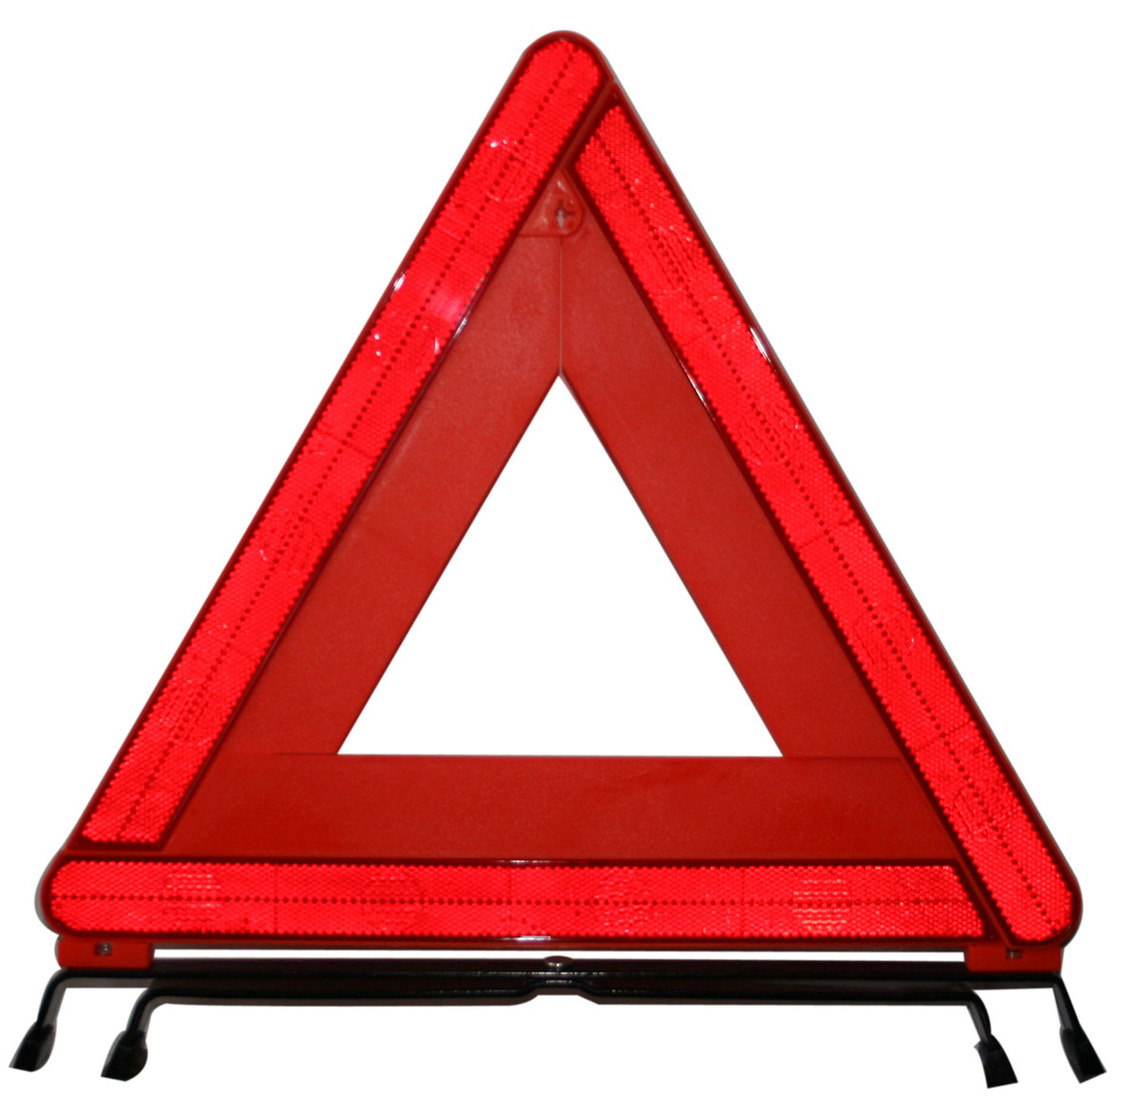 Caution Triangle Clipart - Free to use Clip Art Resource